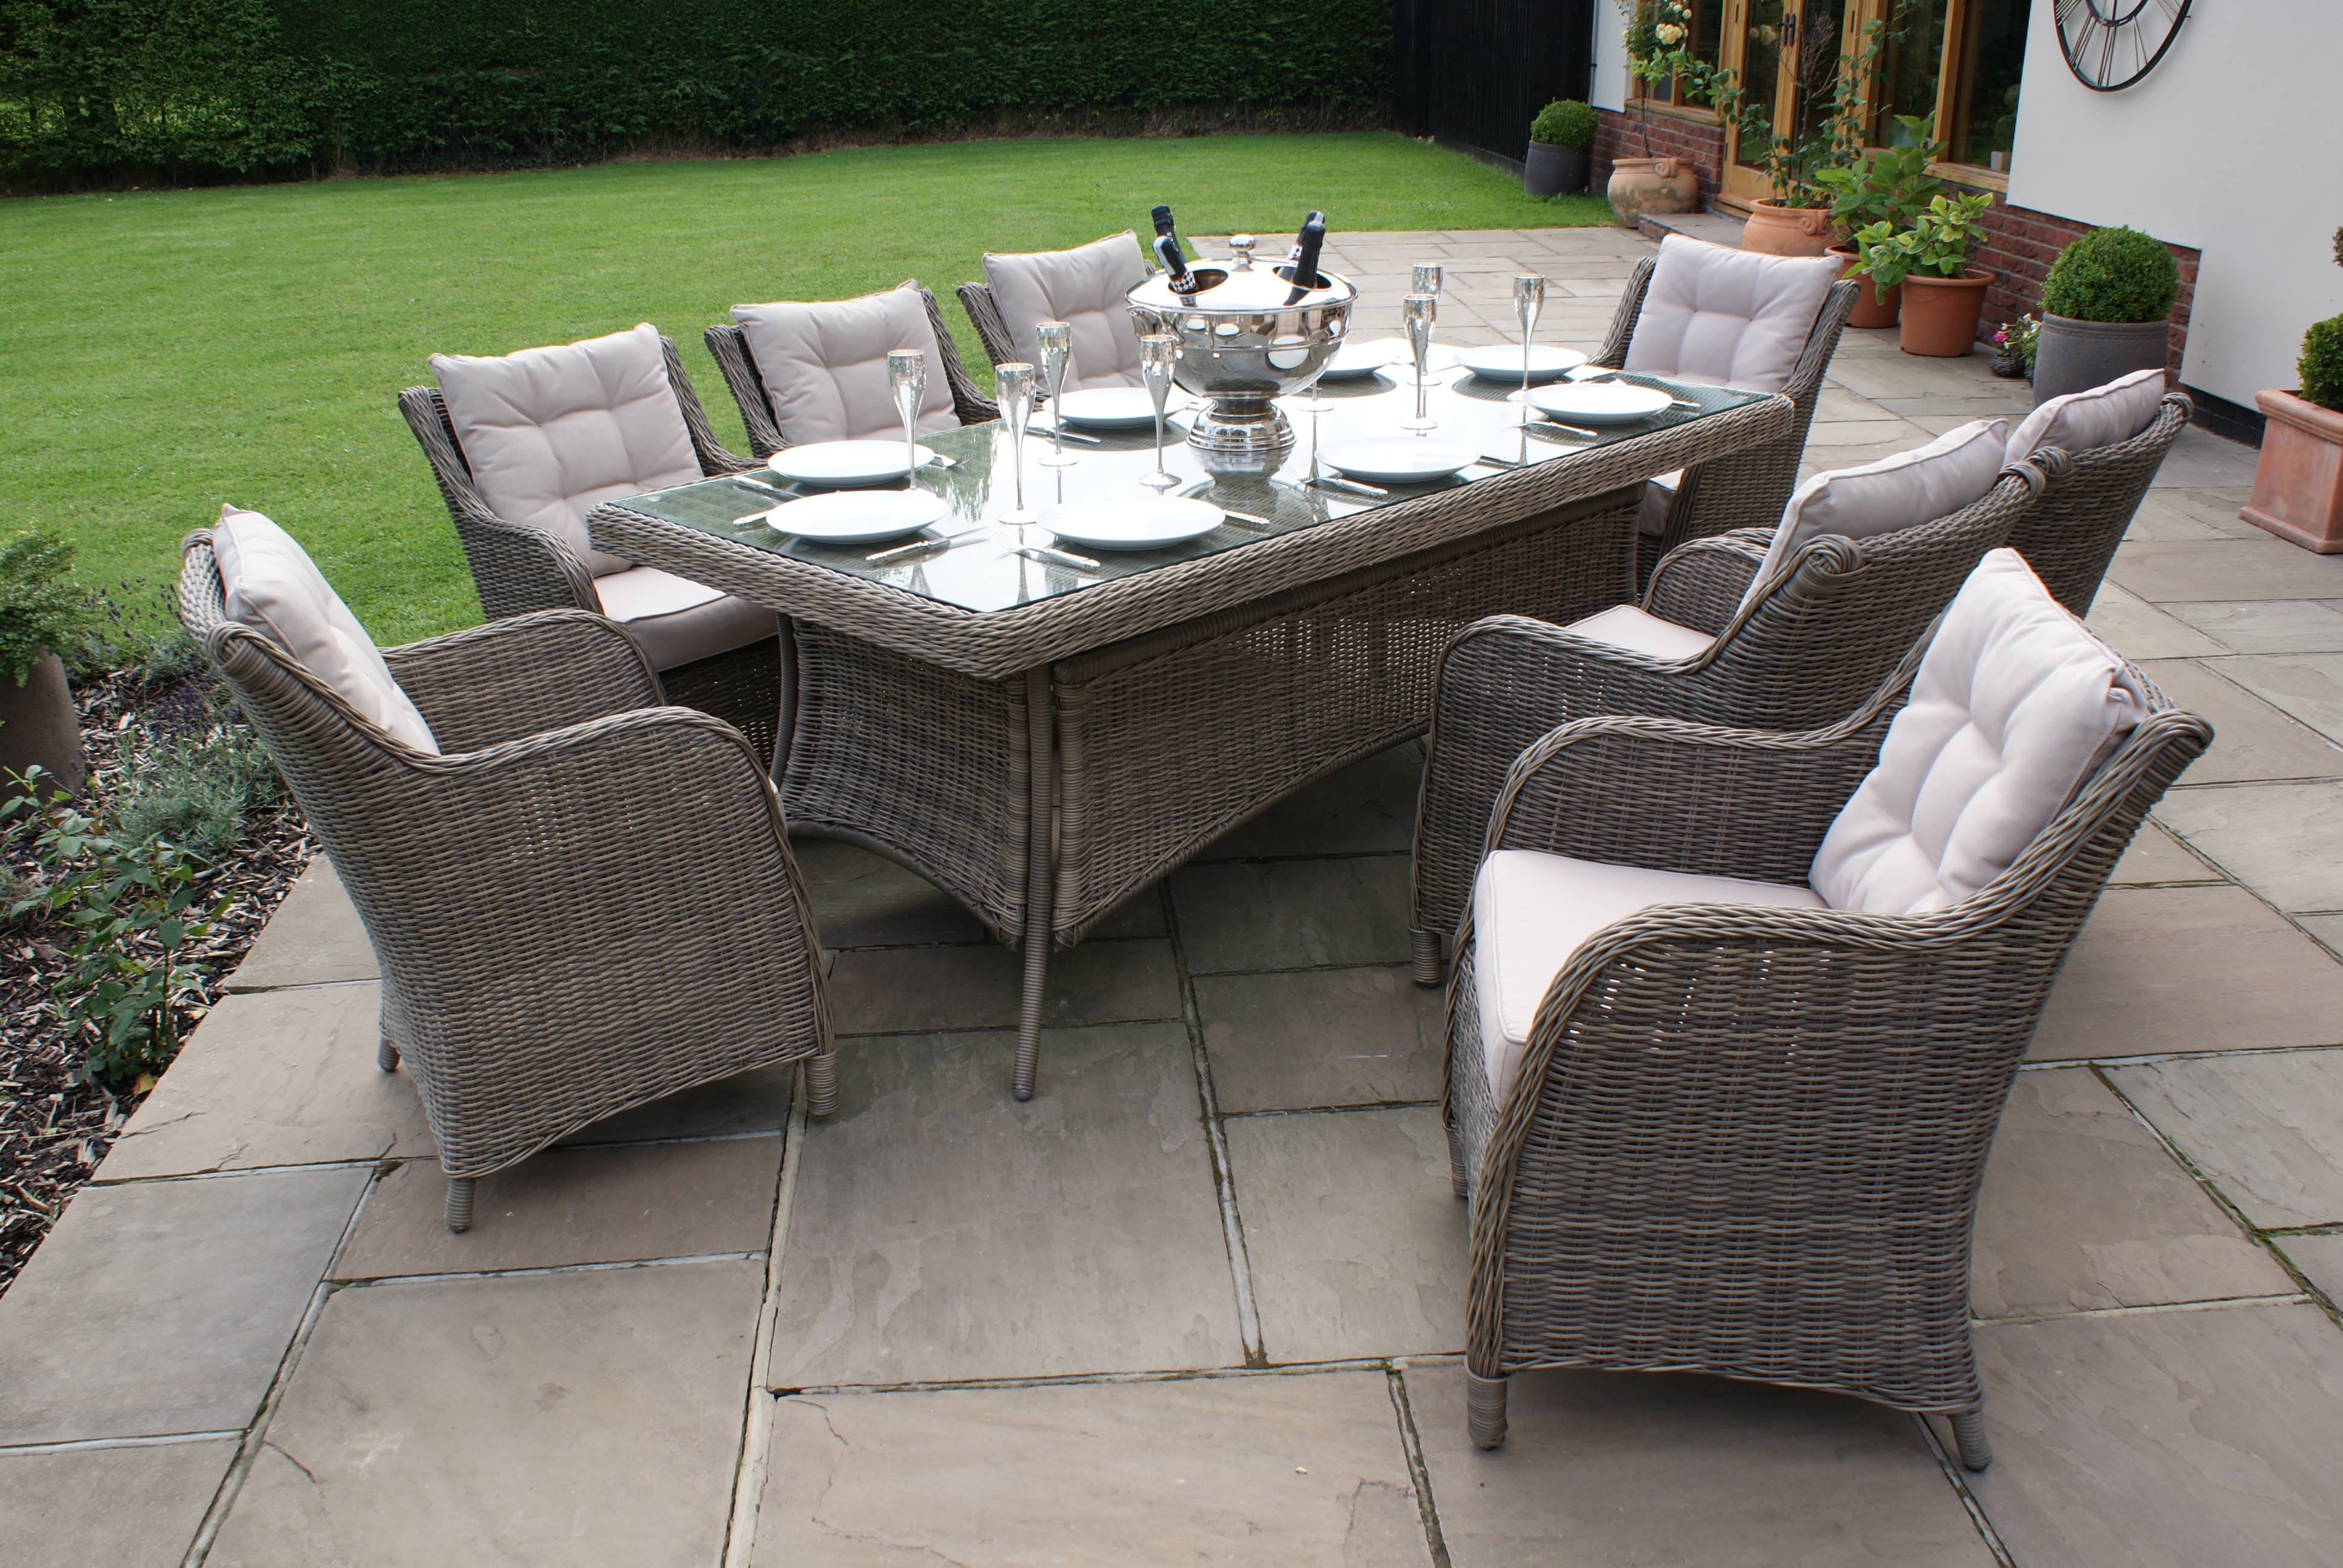 8 Seater Rattan Garden Table And Chairs - Garden Ftempo